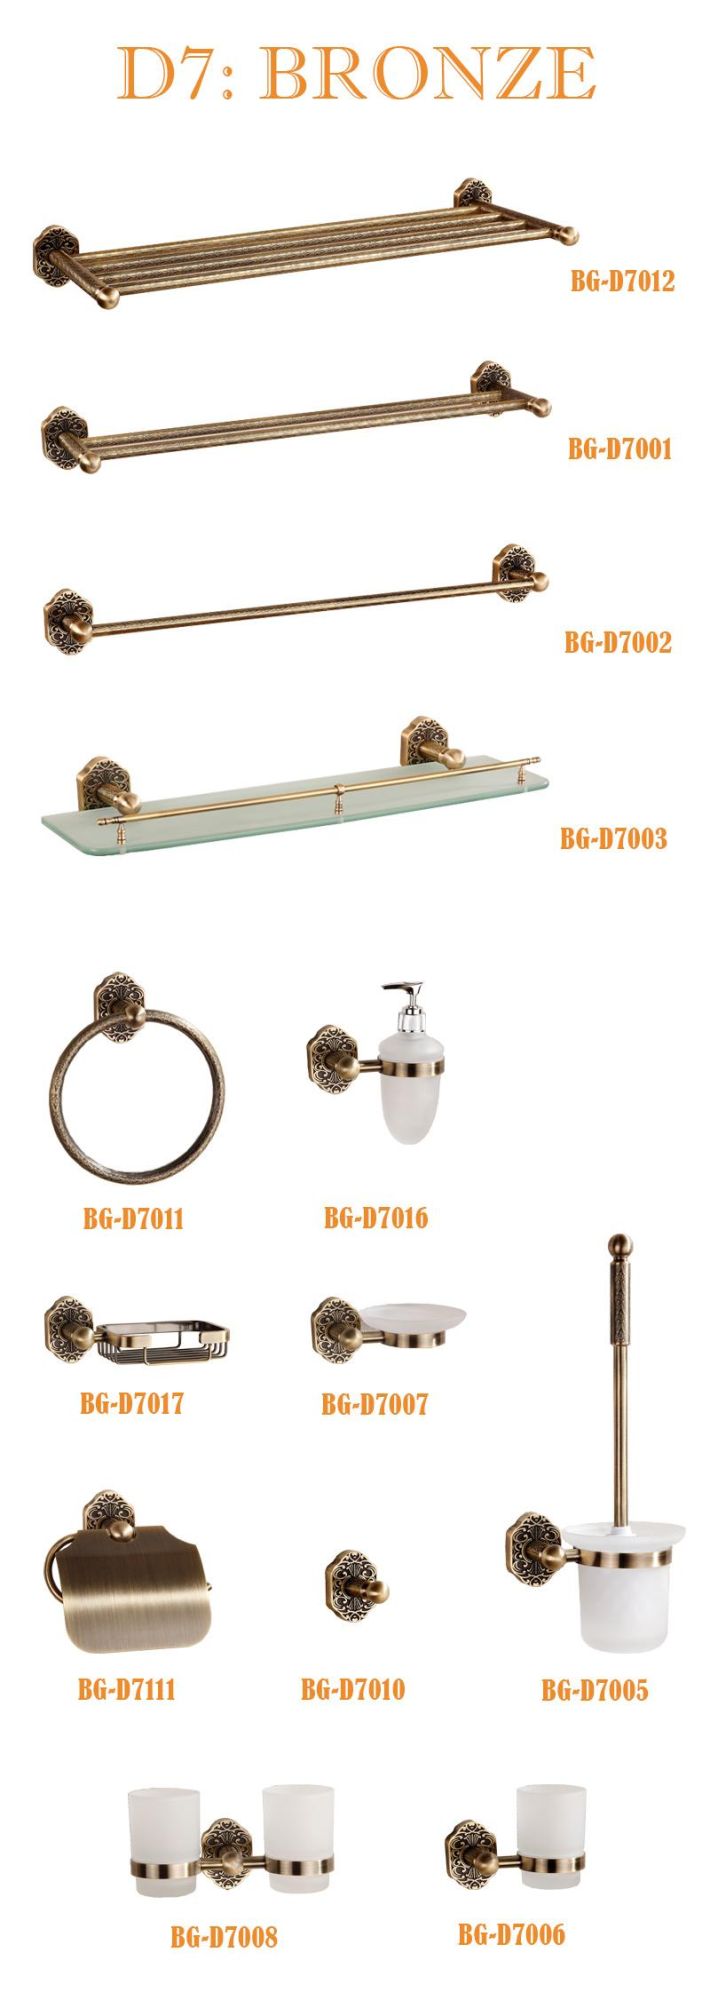 Brass Double Towel Bar in Bronze Color Classic Style (BG-D7002)